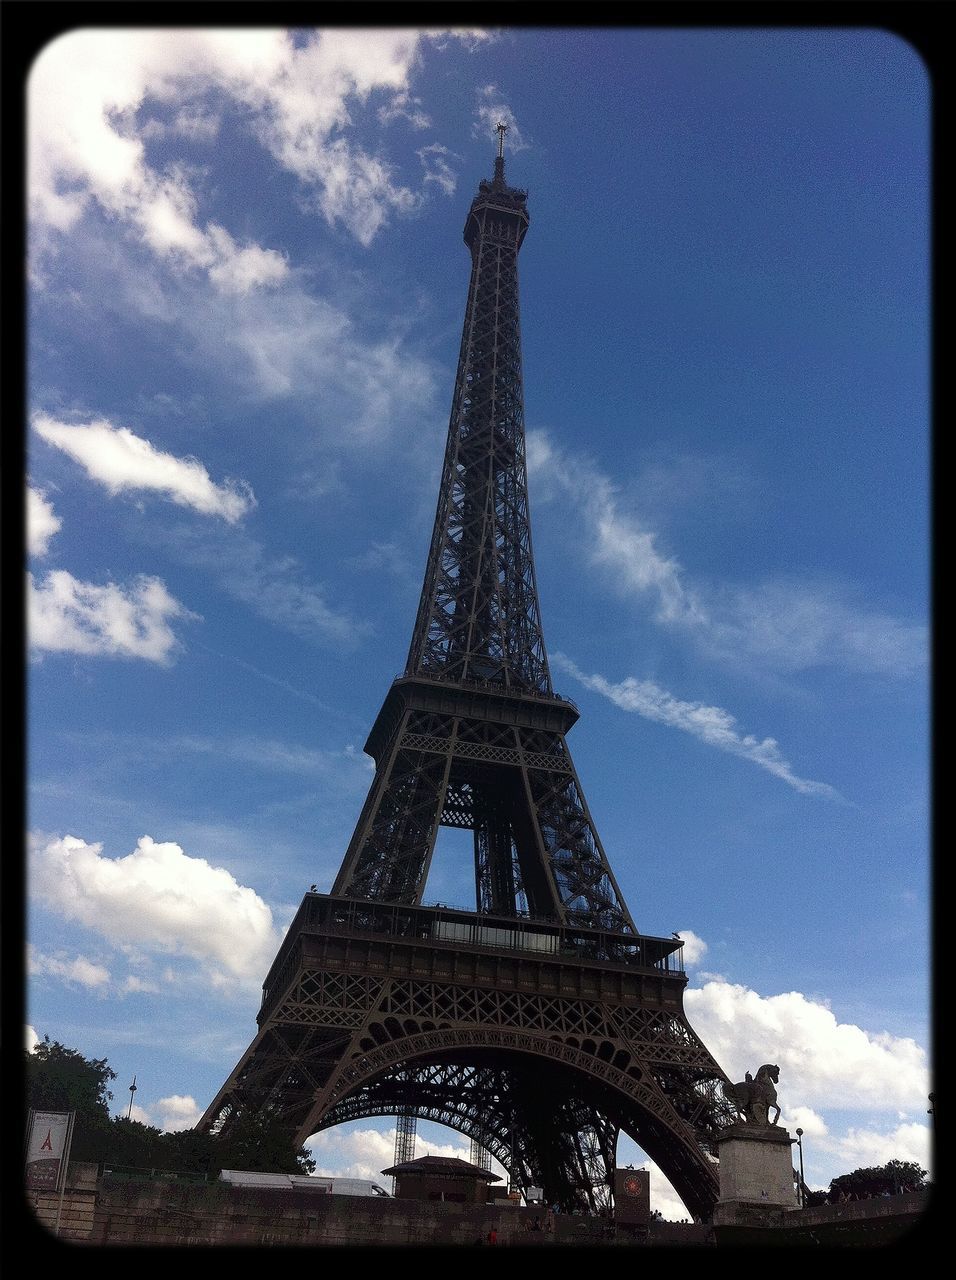 eiffel tower, architecture, built structure, international landmark, famous place, culture, tower, sky, travel destinations, history, metal, tourism, low angle view, capital cities, travel, tall - high, transfer print, cloud - sky, architectural feature, auto post production filter